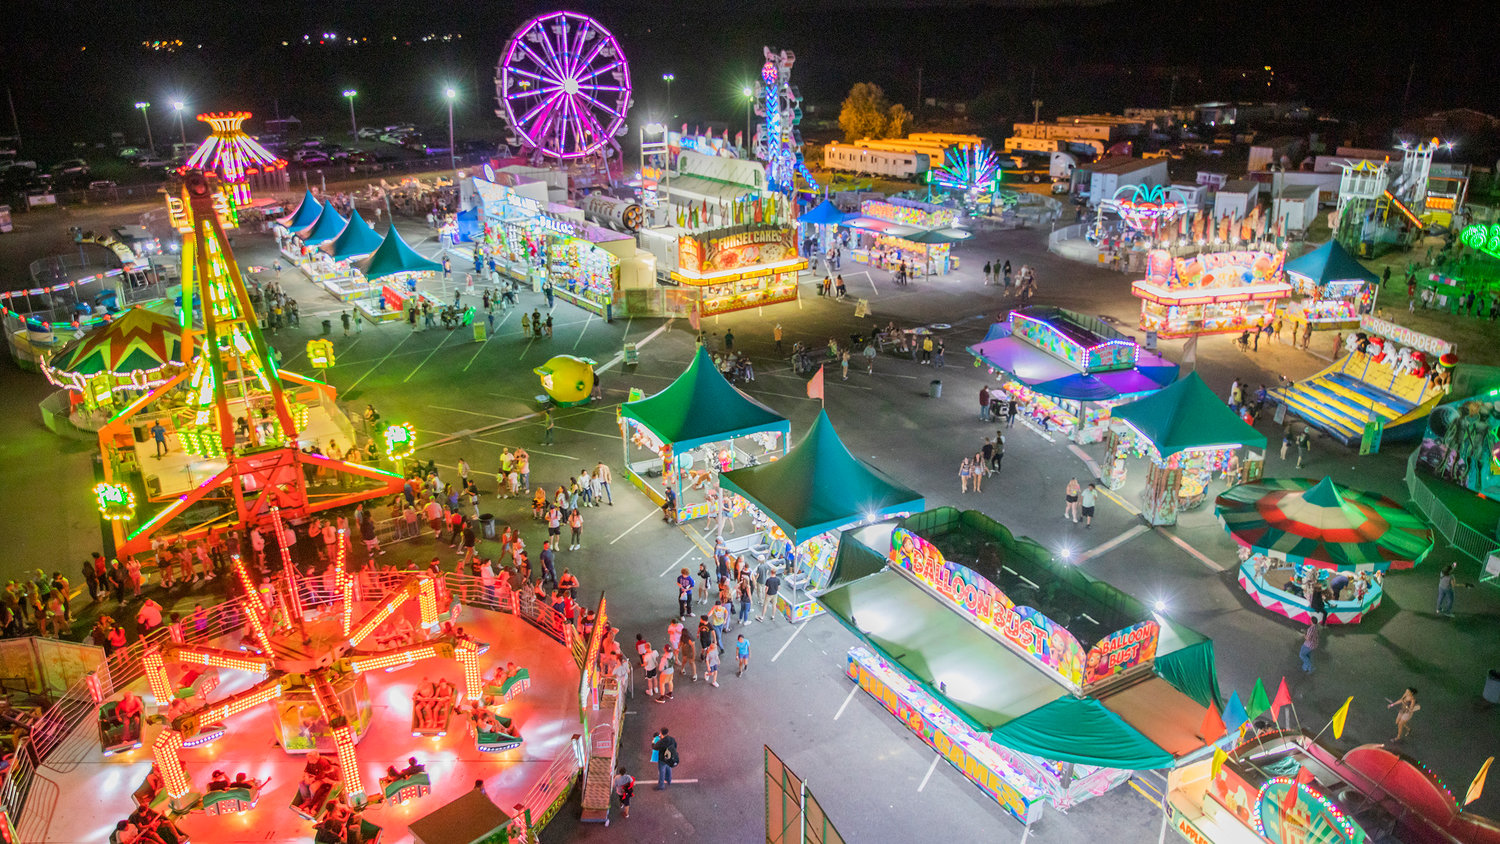 Lights illuminate rides and carnival games at the Southwest Washington Fairgrounds Tuesday night in Centralia.